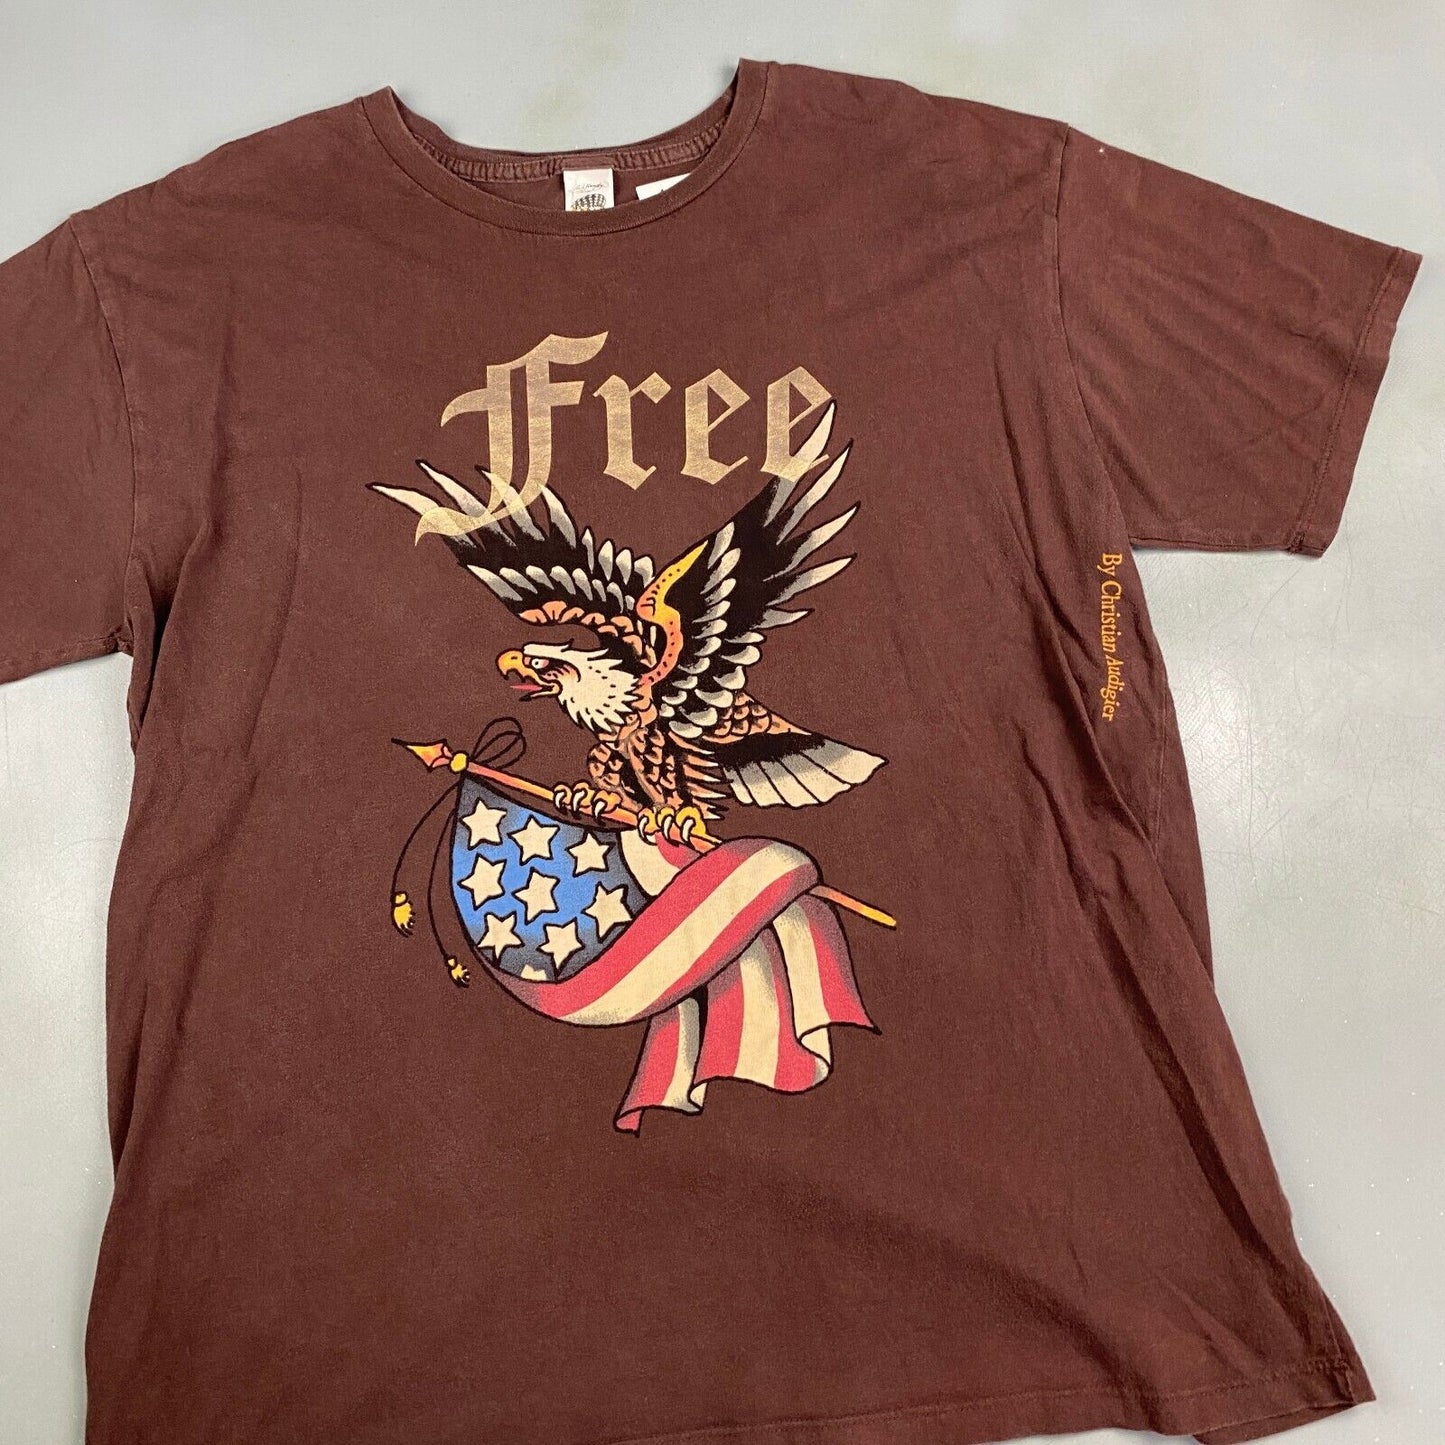 VINTAGE Ed Hardy Free Graphic Brown T-Shirt sz XL Adult